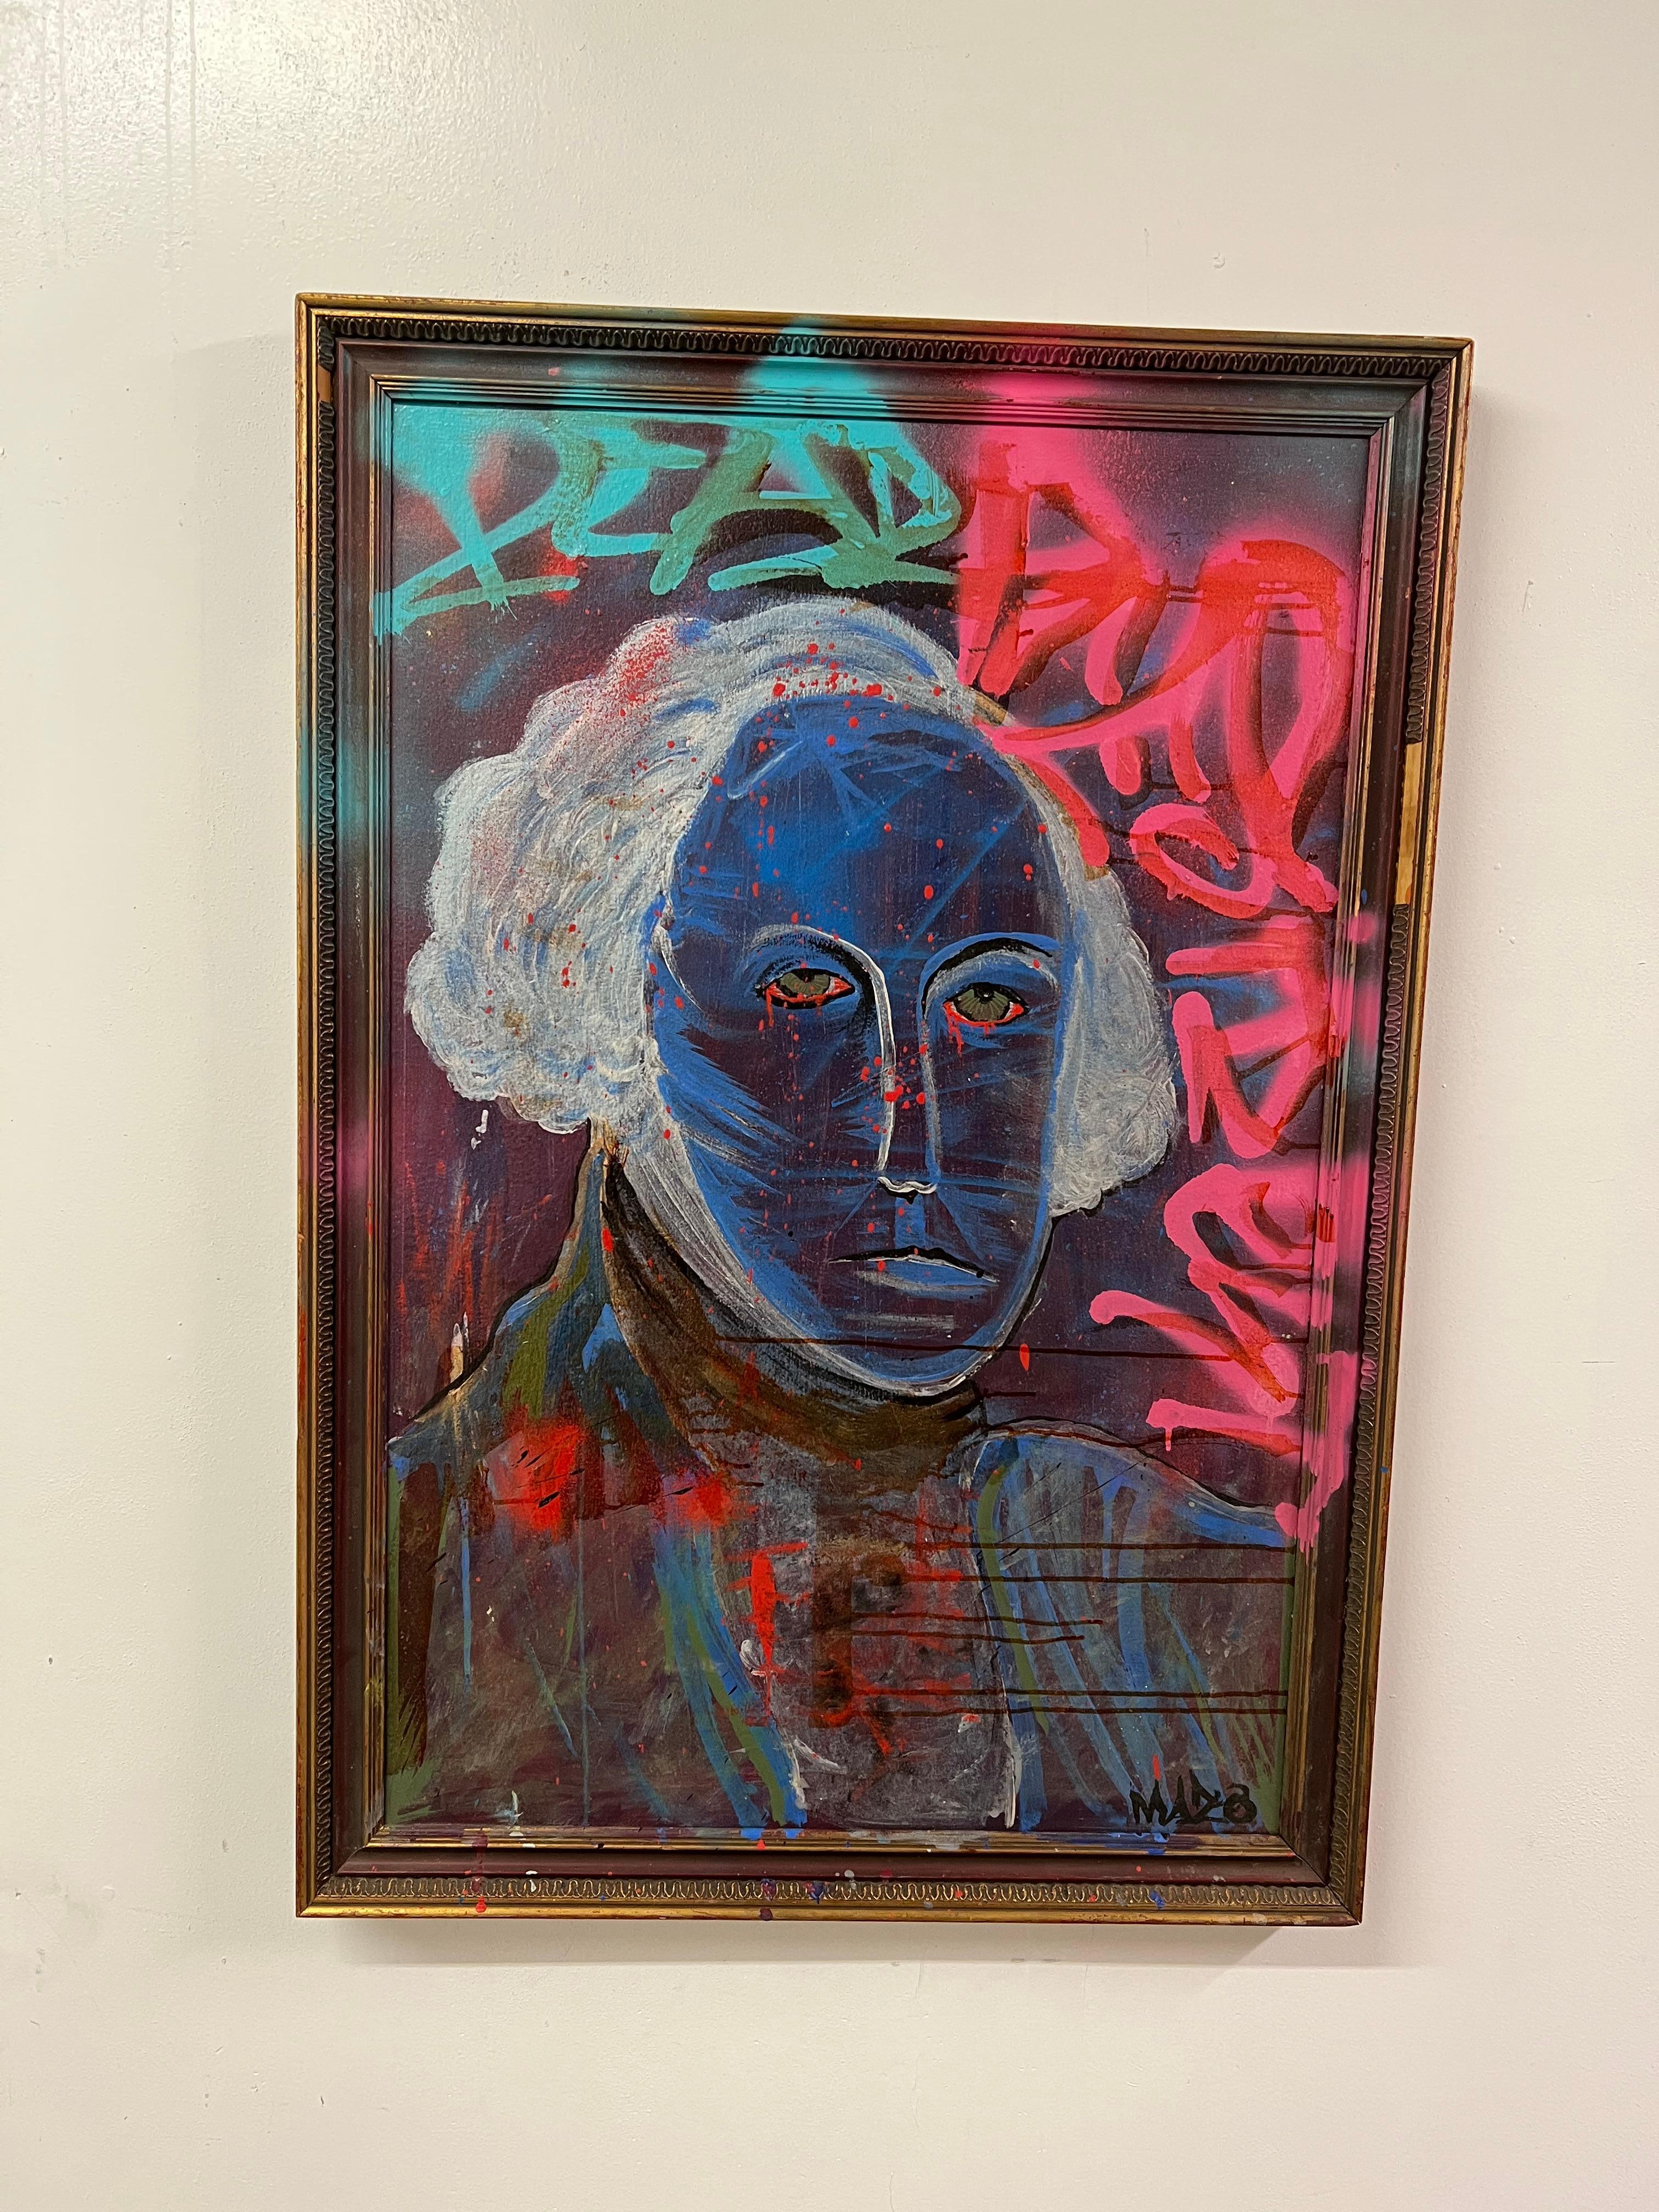 Unique and colorful painting by the Street artist Mazo. Featuring colorful neon graffiti and street style imagery over a stylized portrait of an early American person, like Washington.